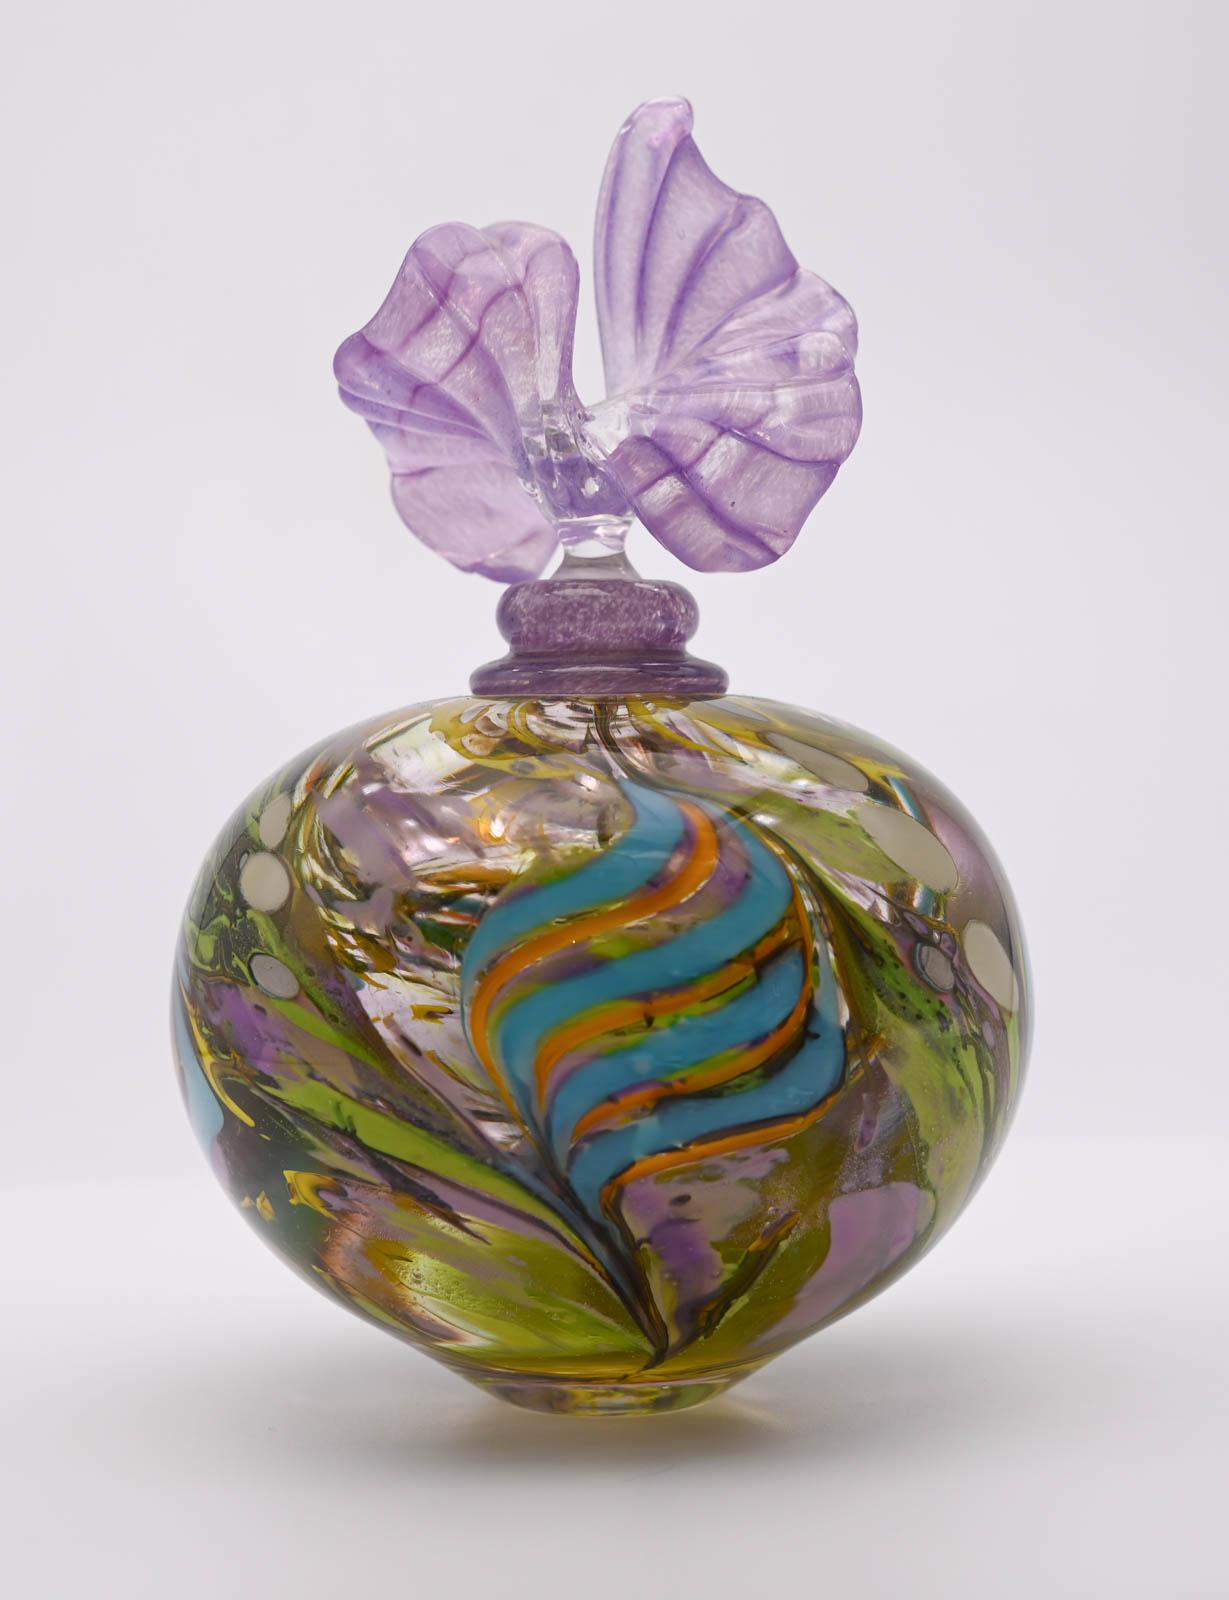 Jorge MATEUS
French master glassmaker

Flacon déco mauve et vert, 2021

Art Glassware - Unique piece
Size : 19 x 11,5 x 11,5 cm
Signed on the base.
In perfect condition.

Sold with invoice and certificate of authenticity.
Fast and careful shipping